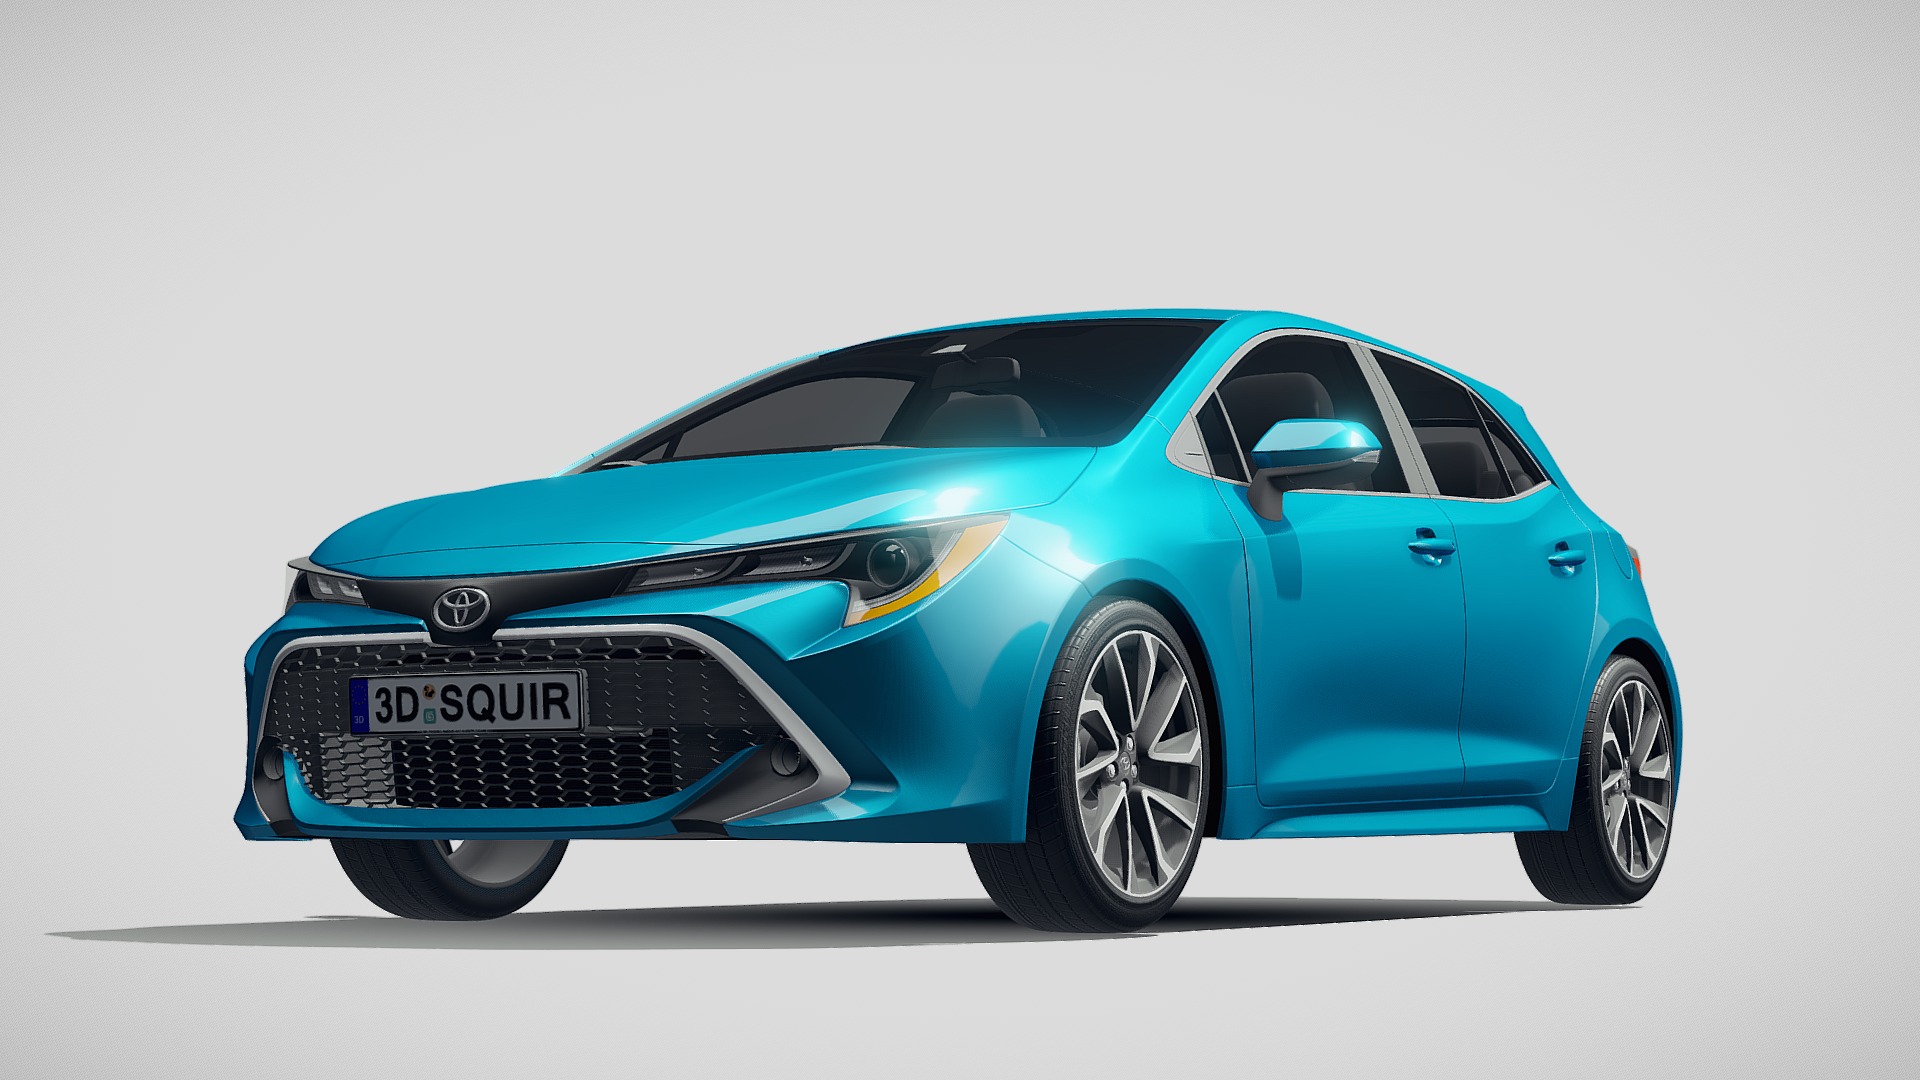 3D model Toyota Corolla Hatchback 2019 - This is a 3D model of the Toyota Corolla Hatchback 2019. The 3D model is about a blue car with a black grill.